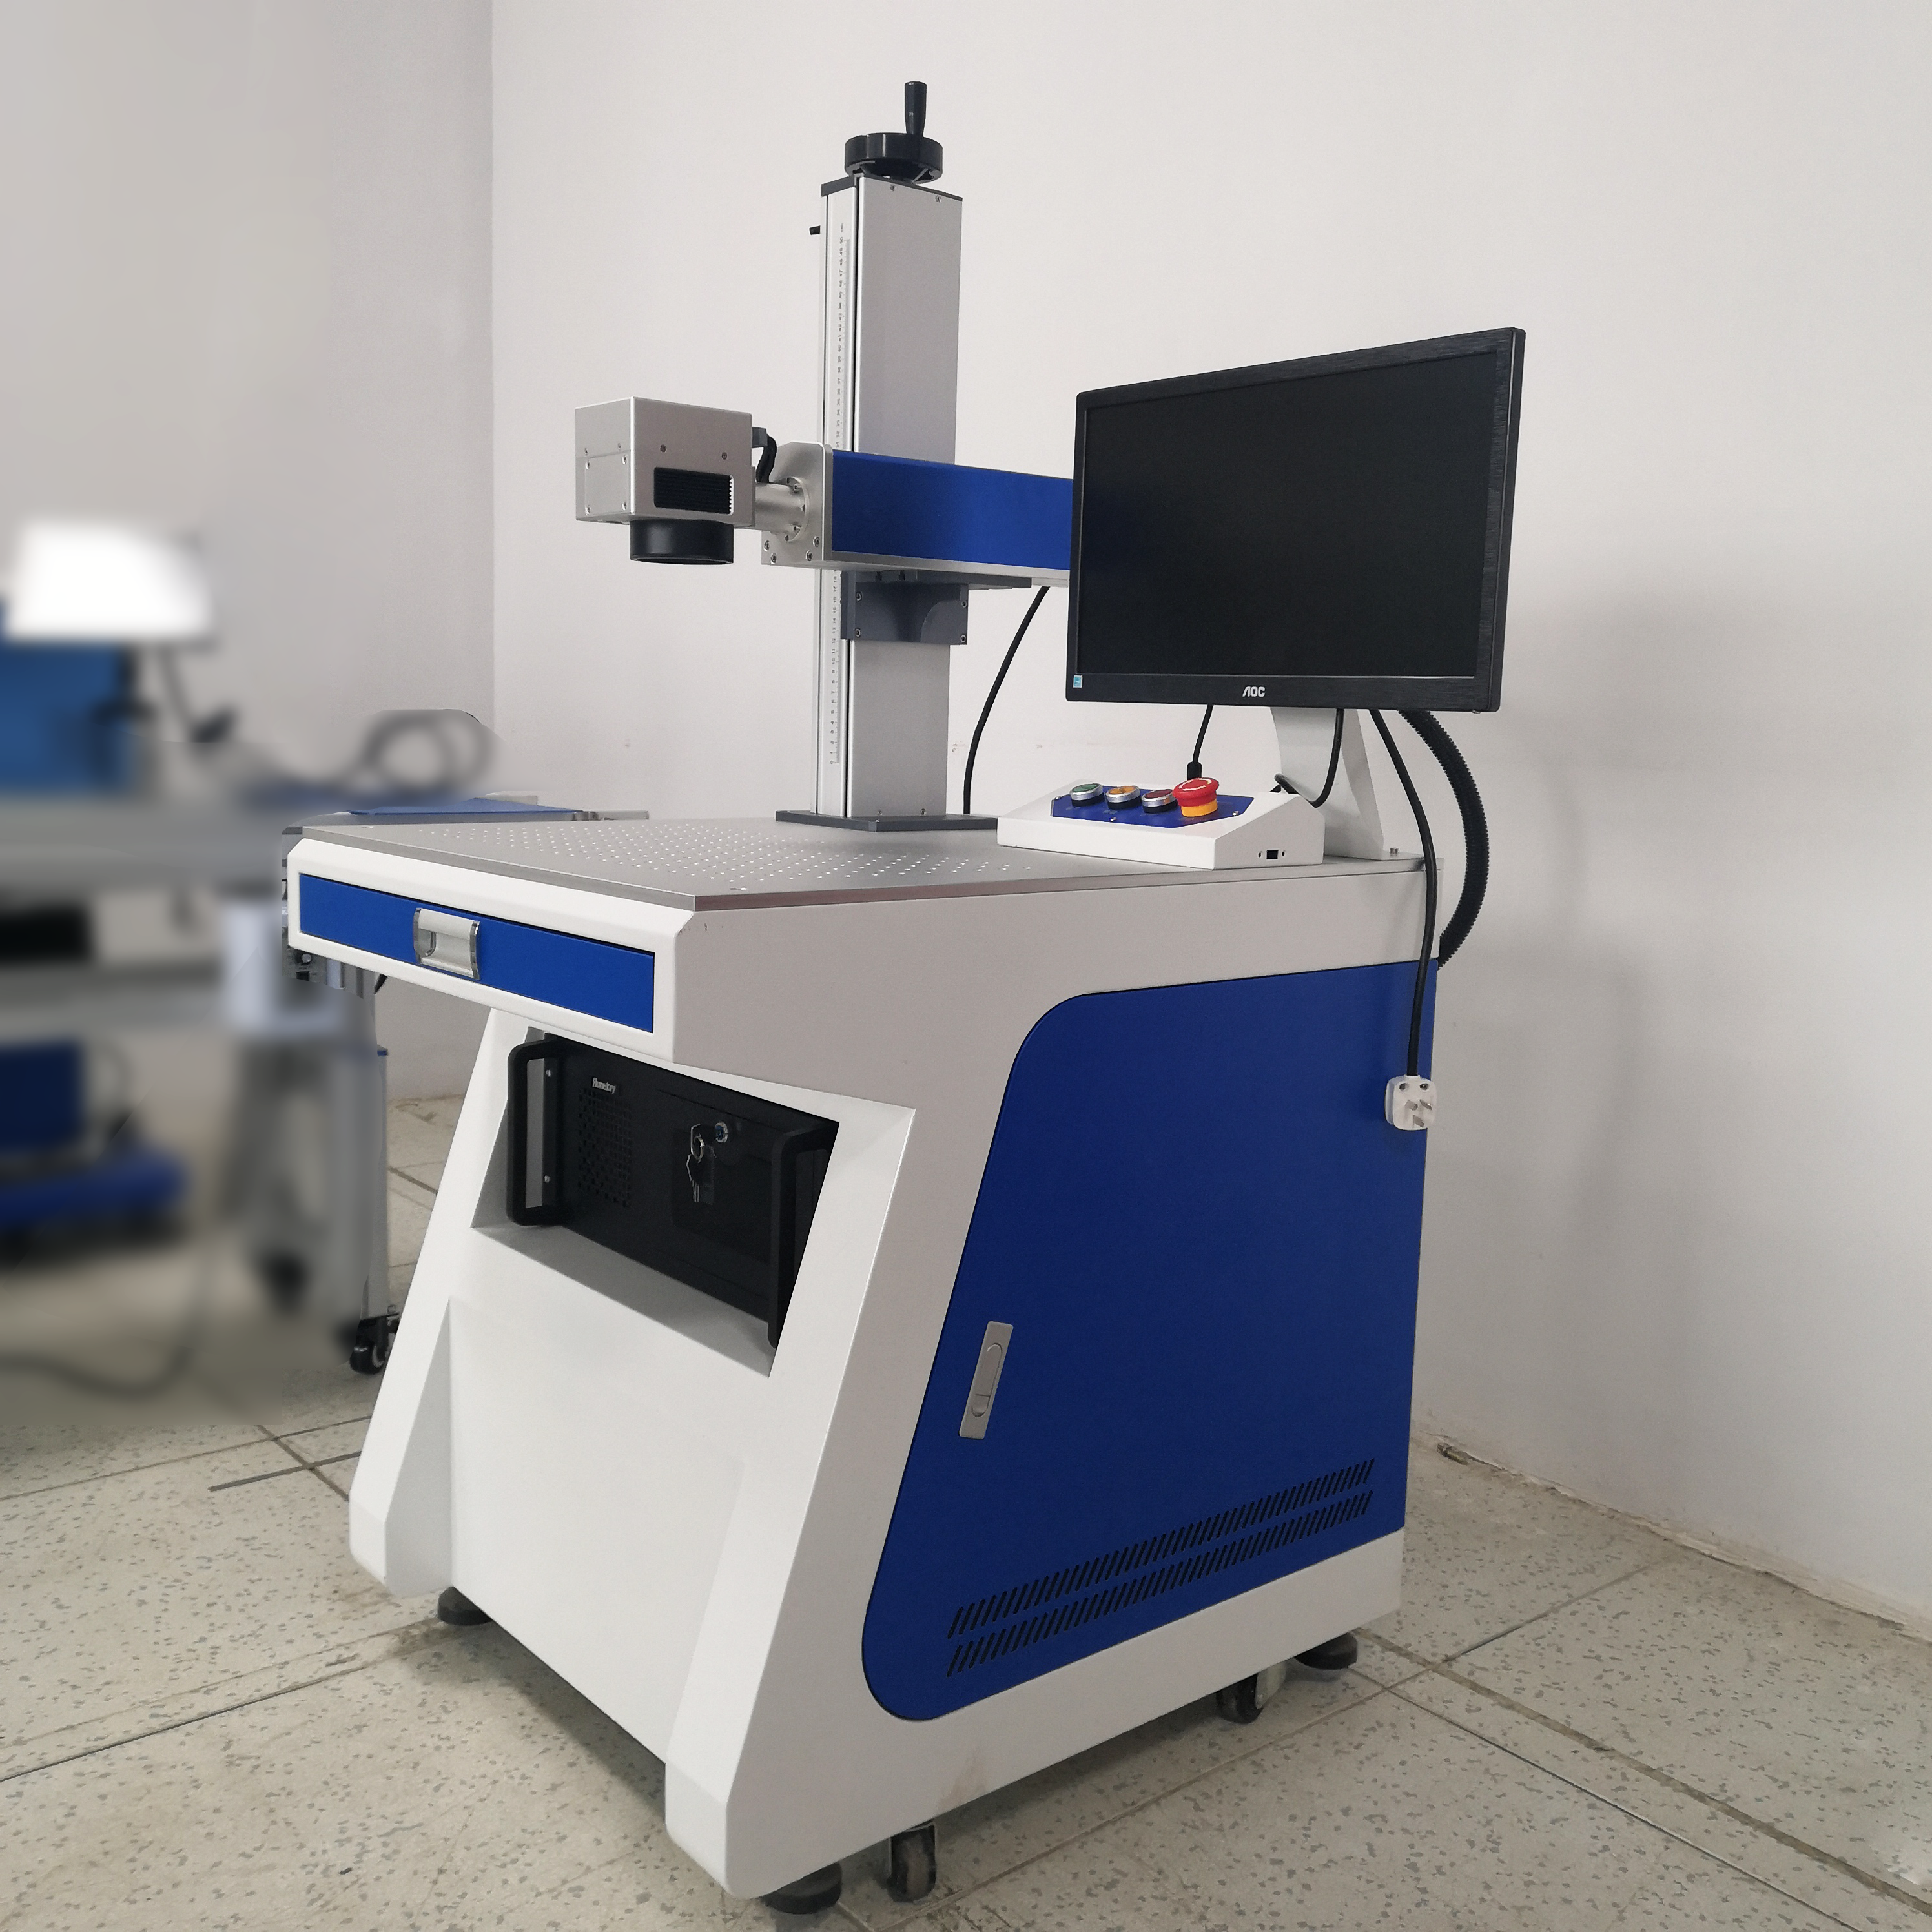  30w Laser Marking Machine for Small Parts Engrave